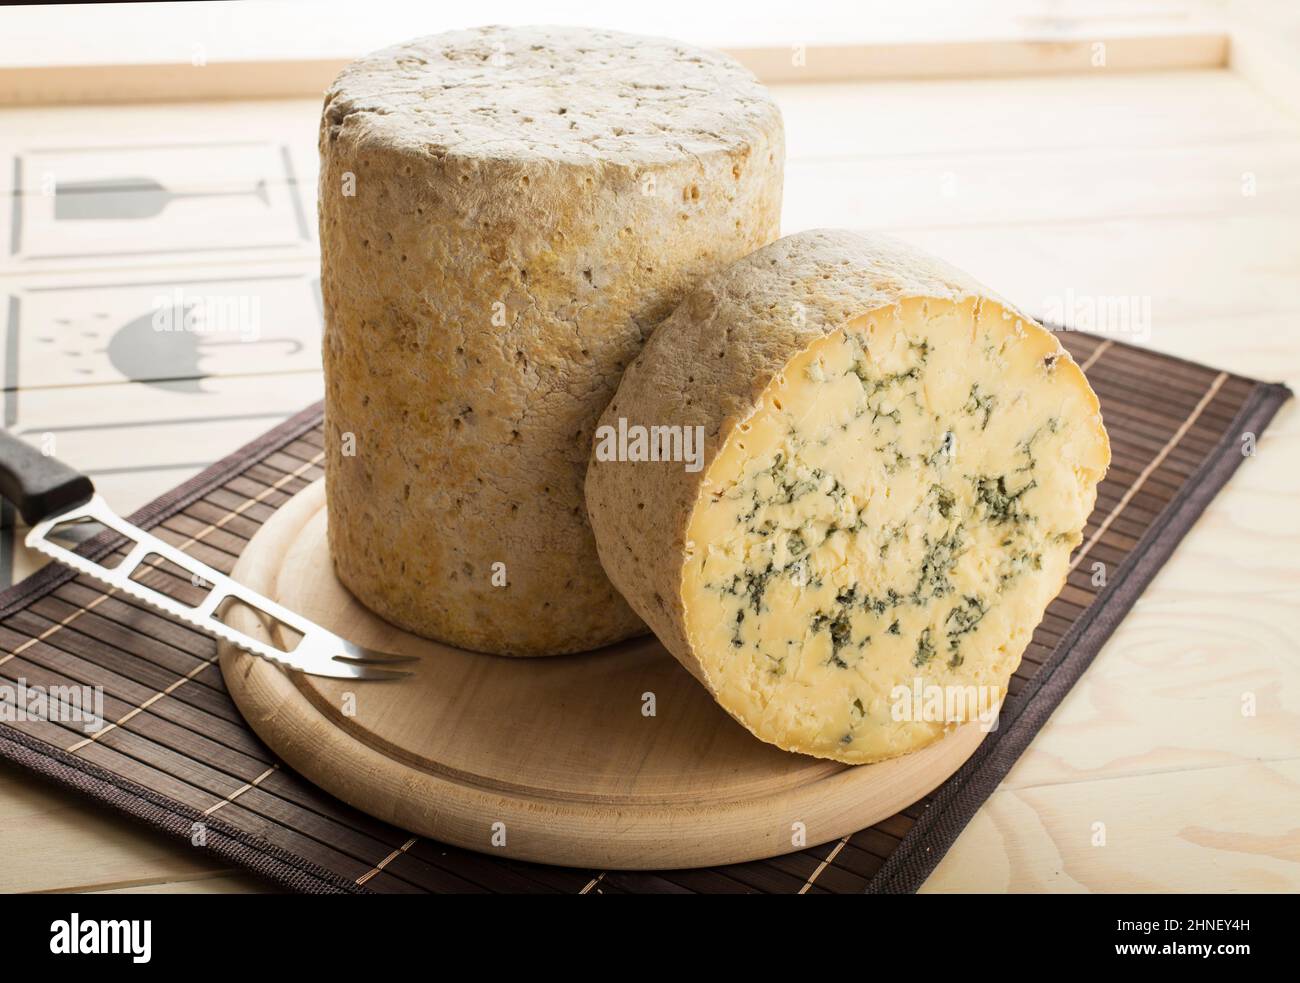 Cheddar PDO cheese with herbs cut and served on a wooden plate Stock Photo